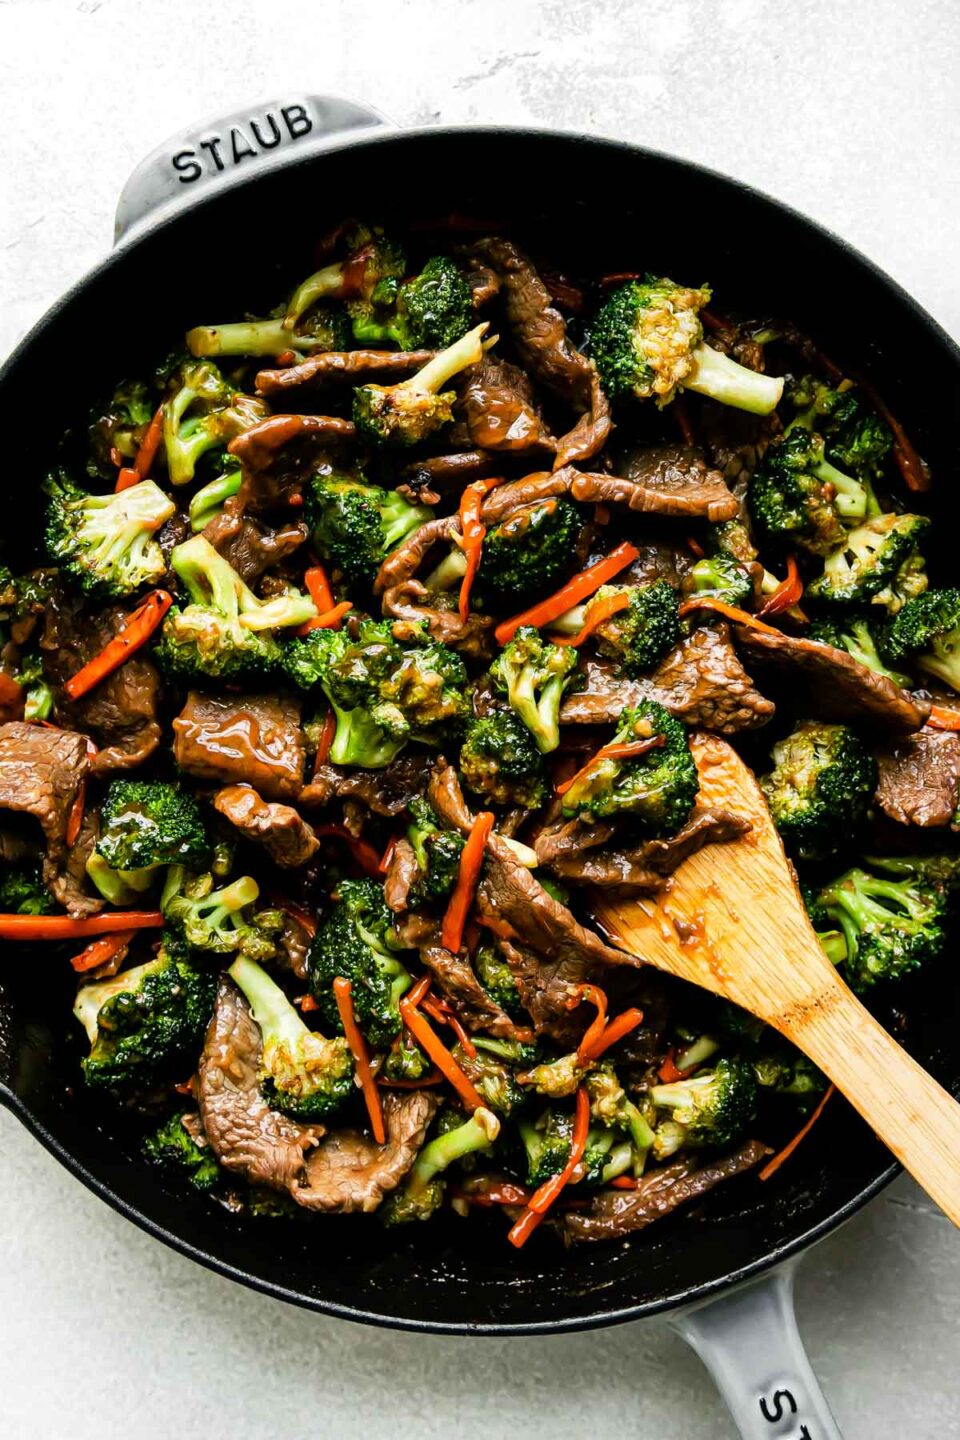 Beef and broccoli stir fry fills a large gray Staub cast iron skillet that sits atop a creamy white textured surface. A wooden spoon rests inside of the pan for stirring.